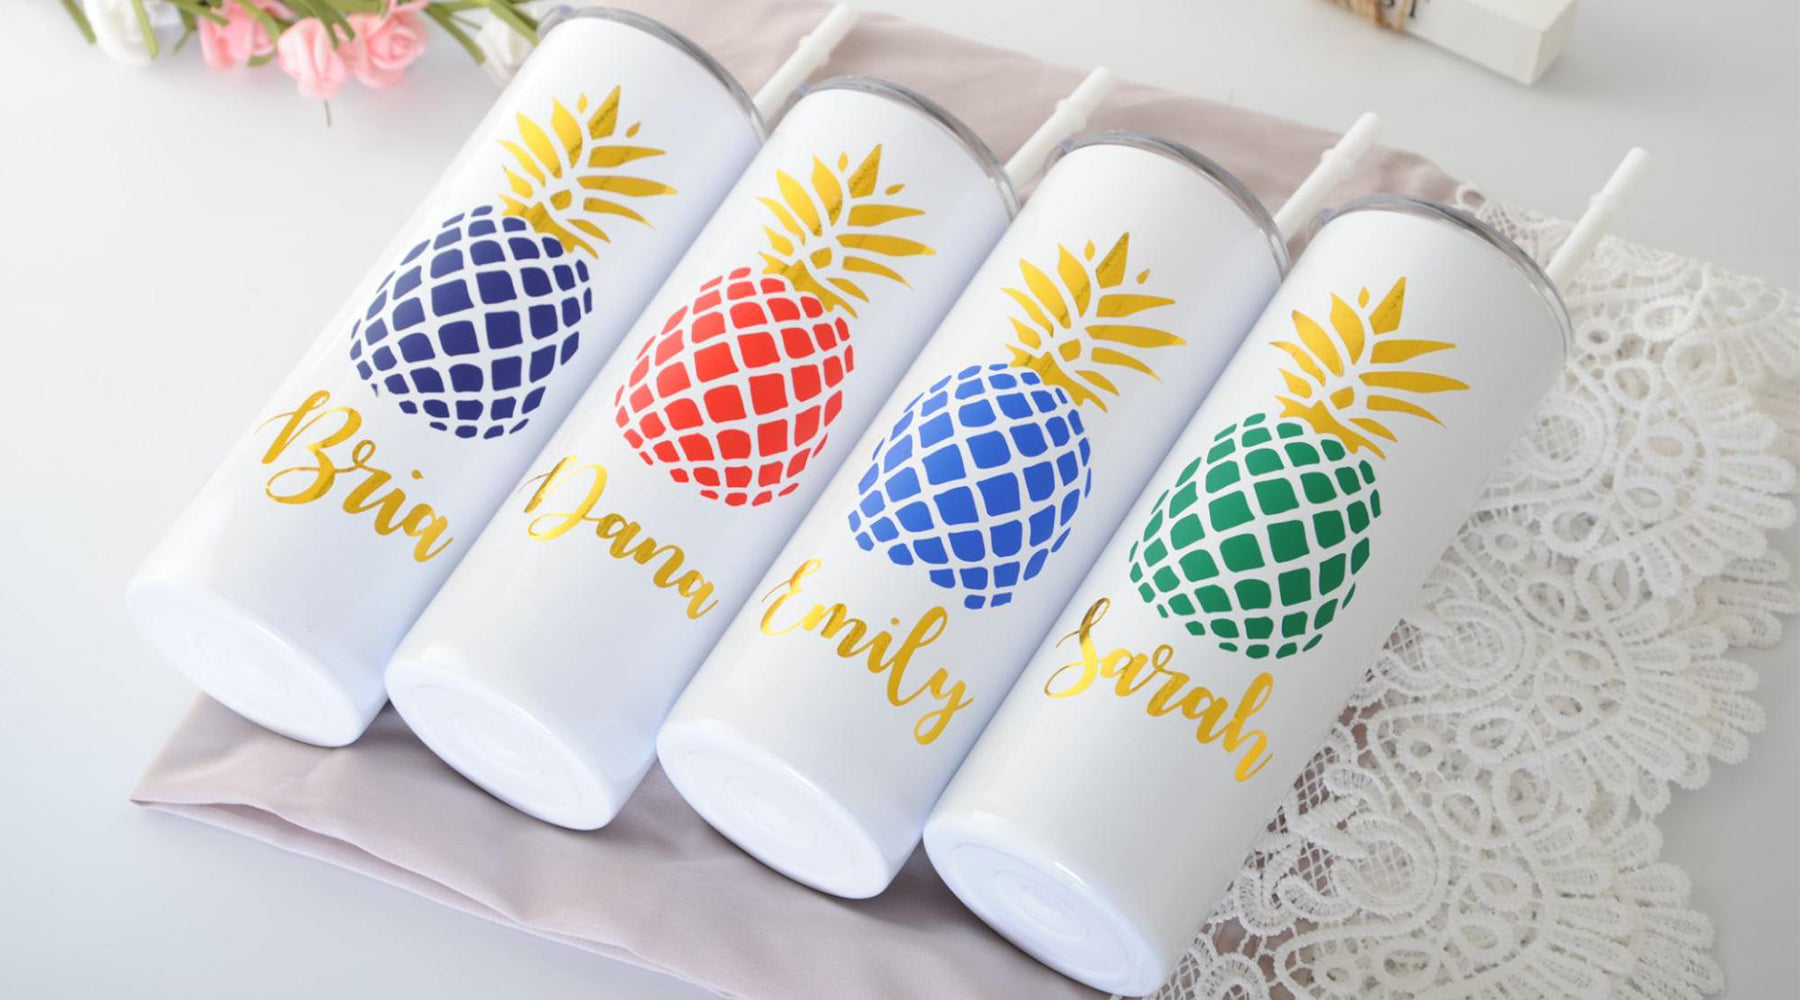 Four white candles with different color pineapples rest on a grey cloth. Each candle has a different name printed below the colorful pineapple..